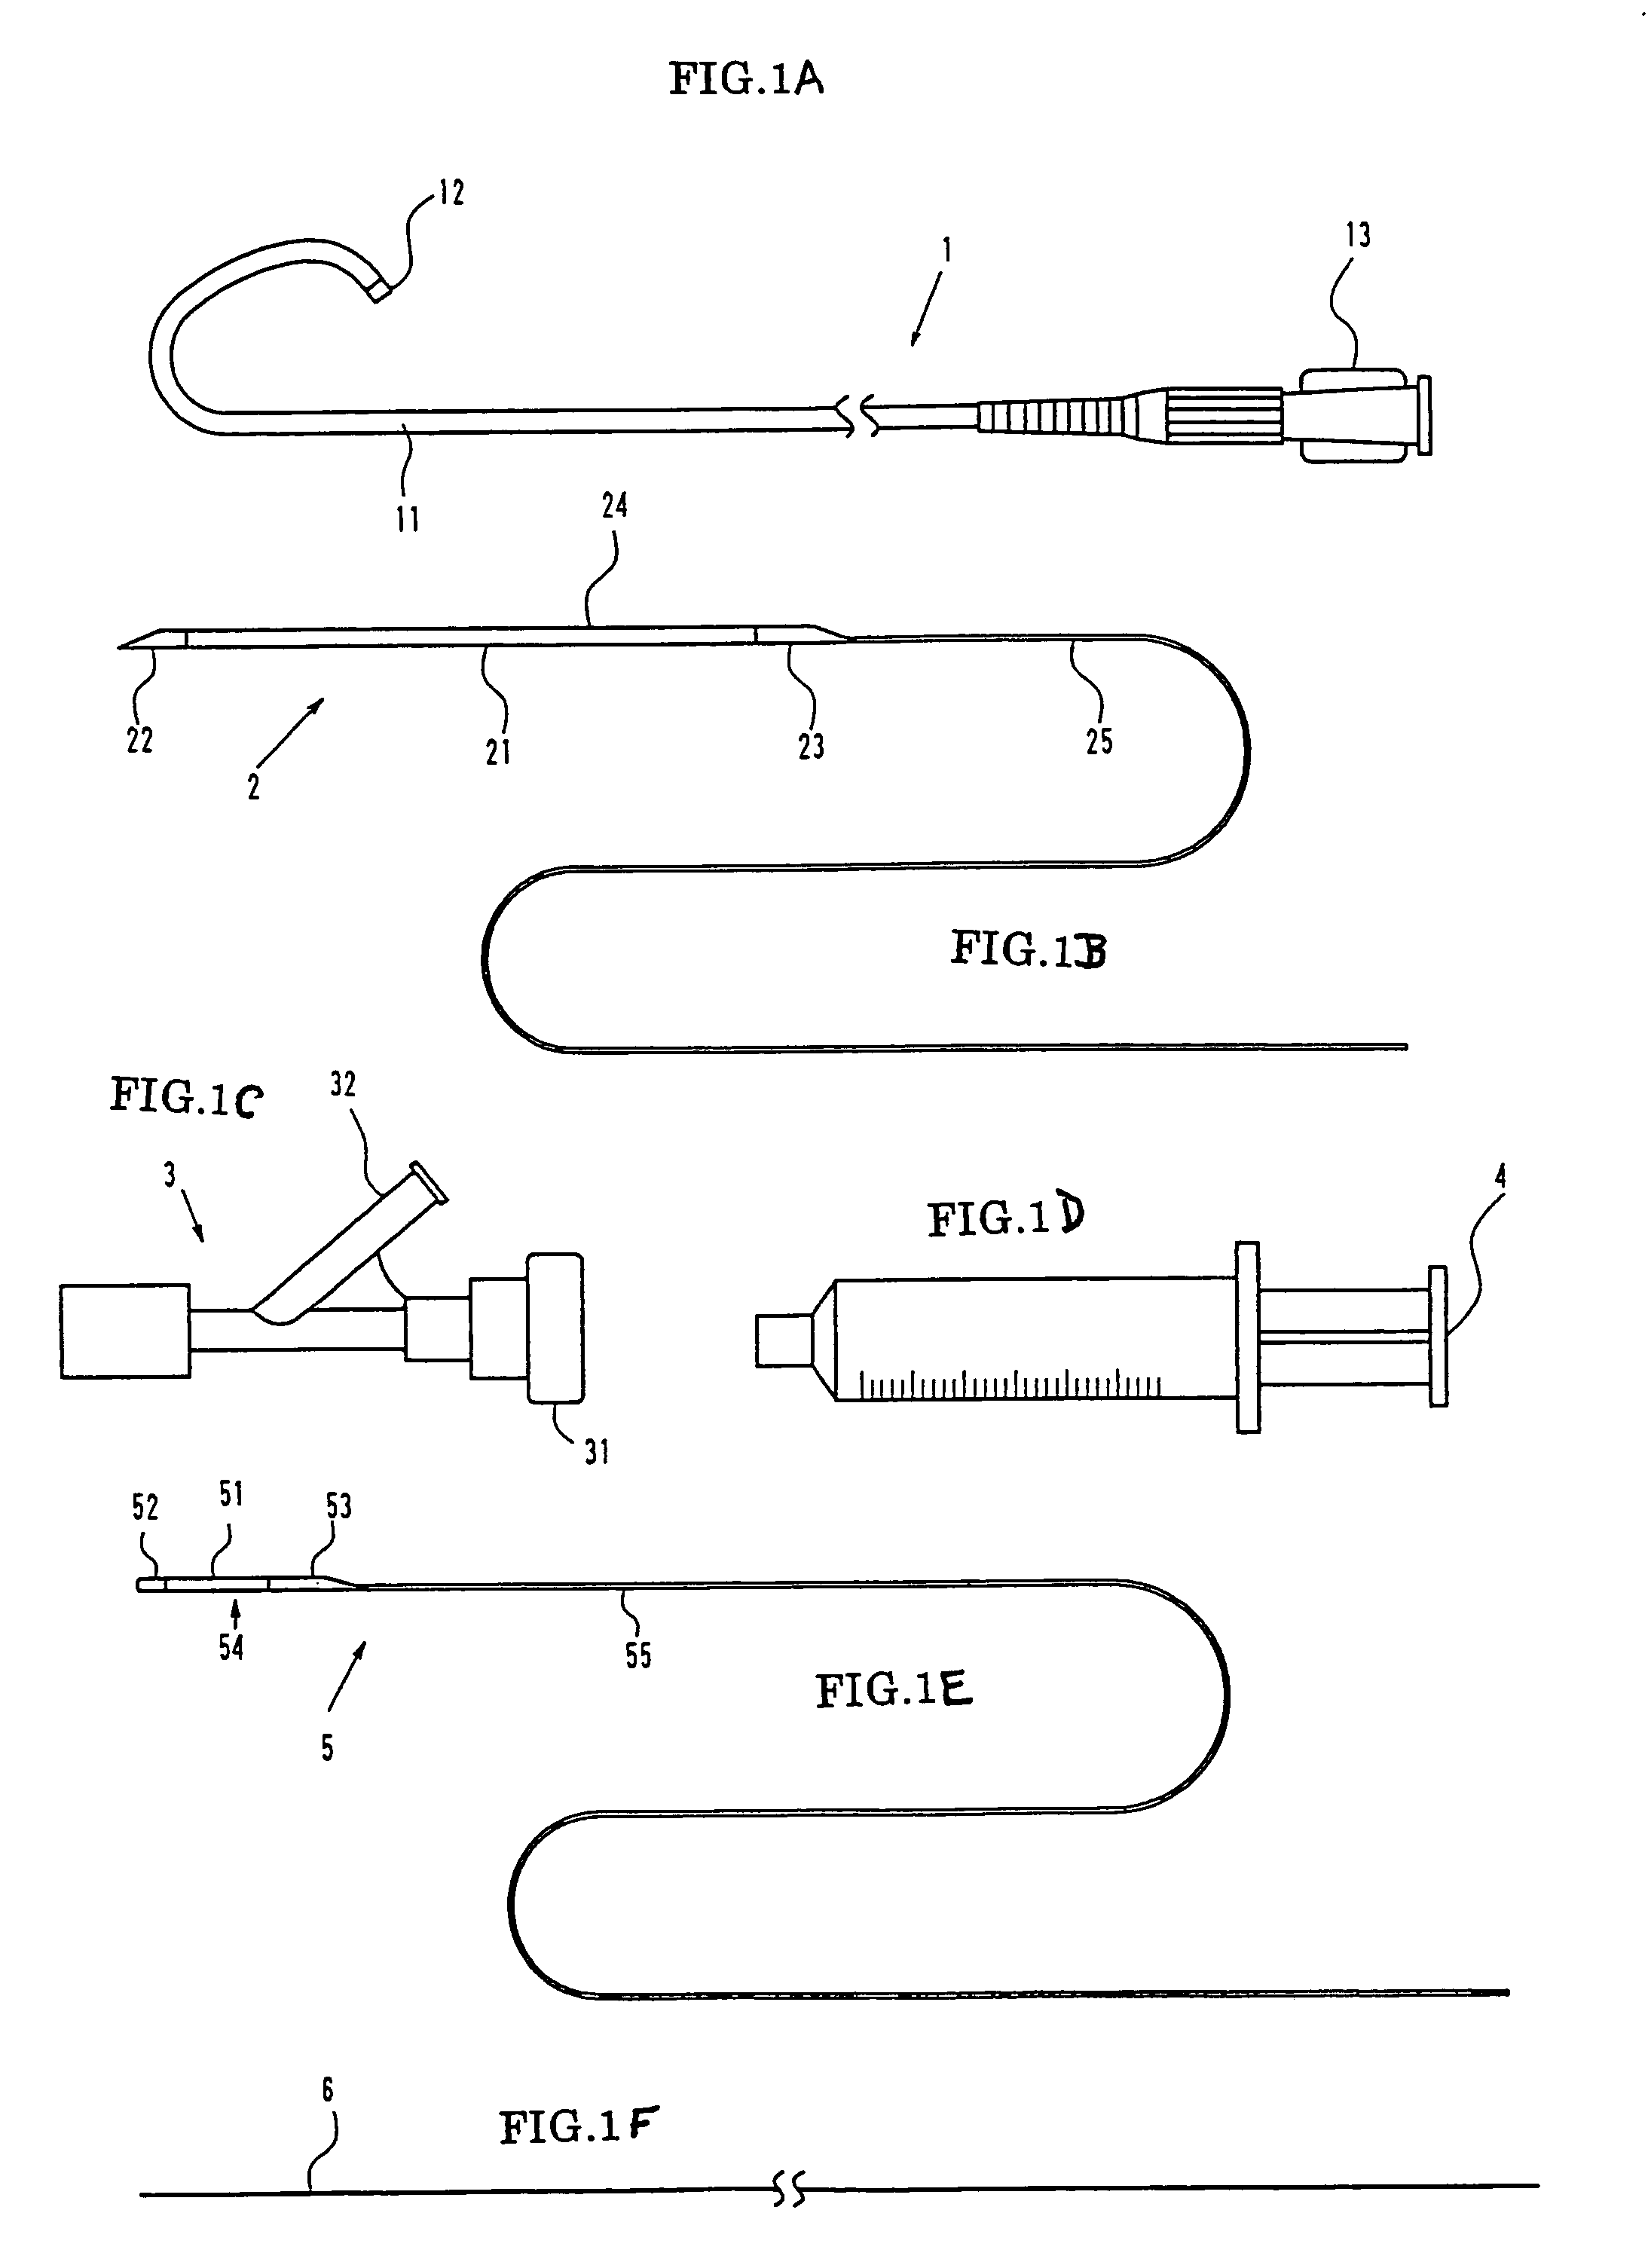 Intravascular foreign matter suction assembly